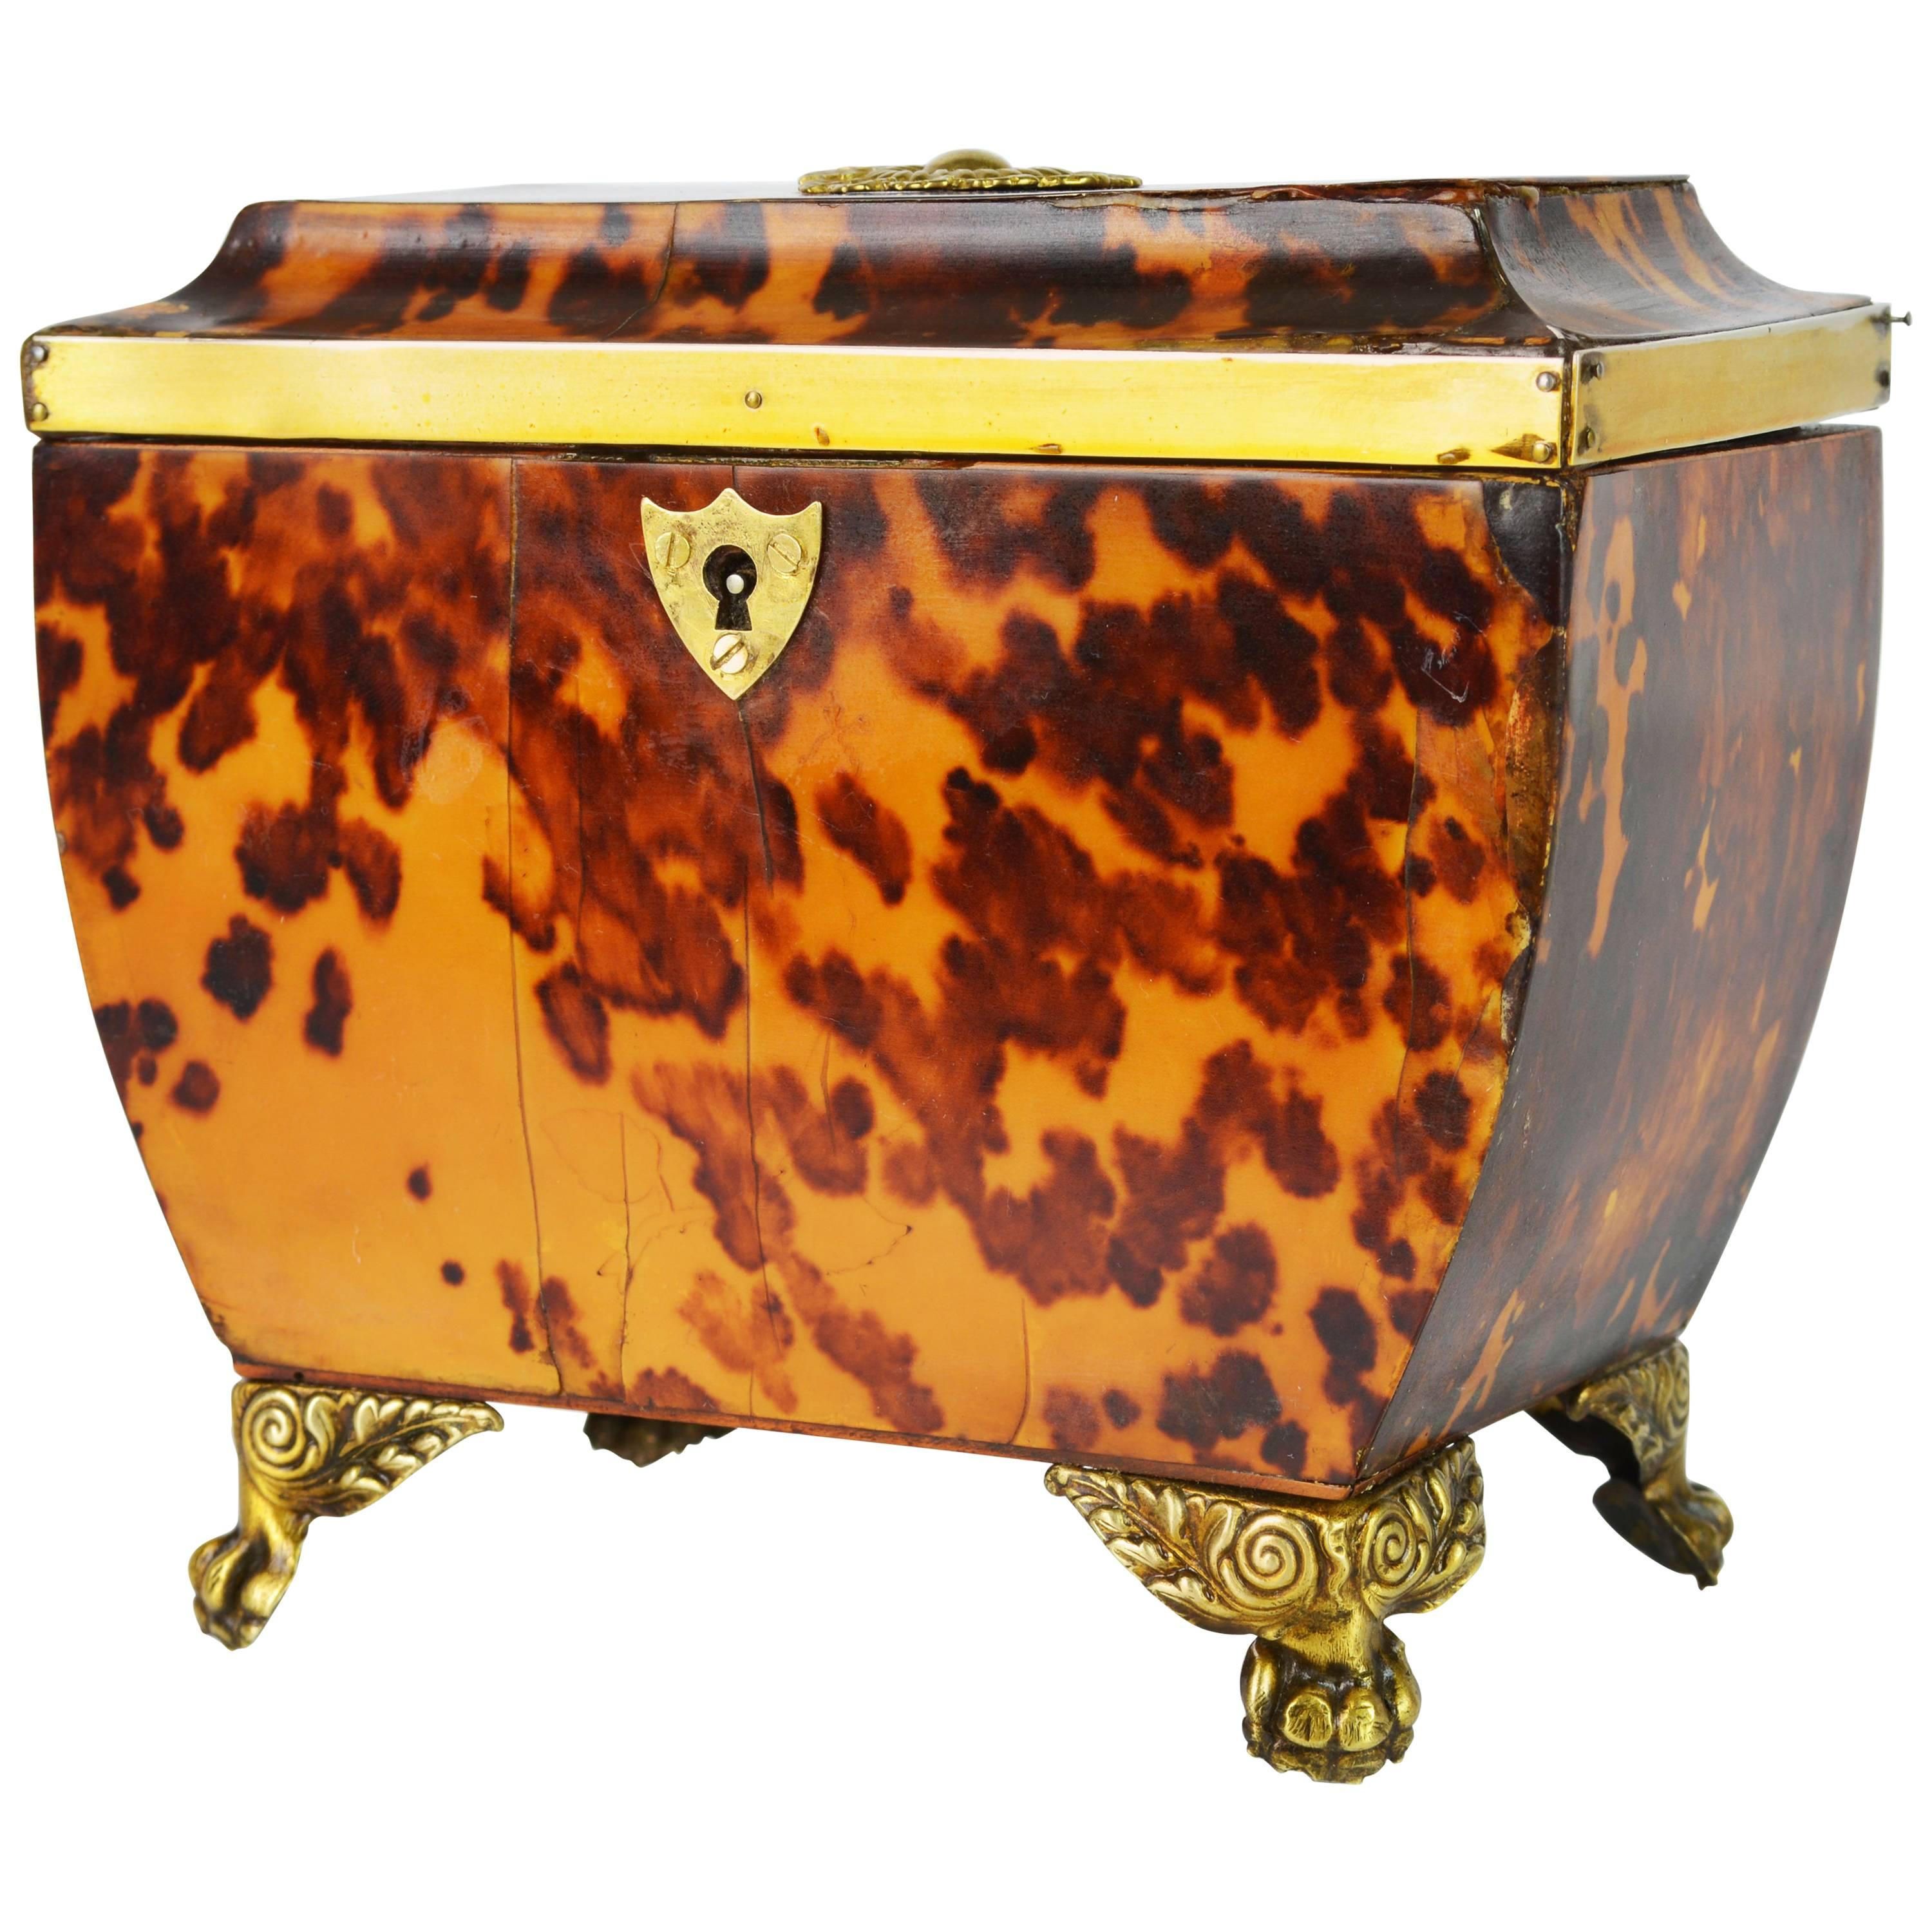 Lovely English Regency Tortoiseshell Footed Tea Caddy with Intach Interior